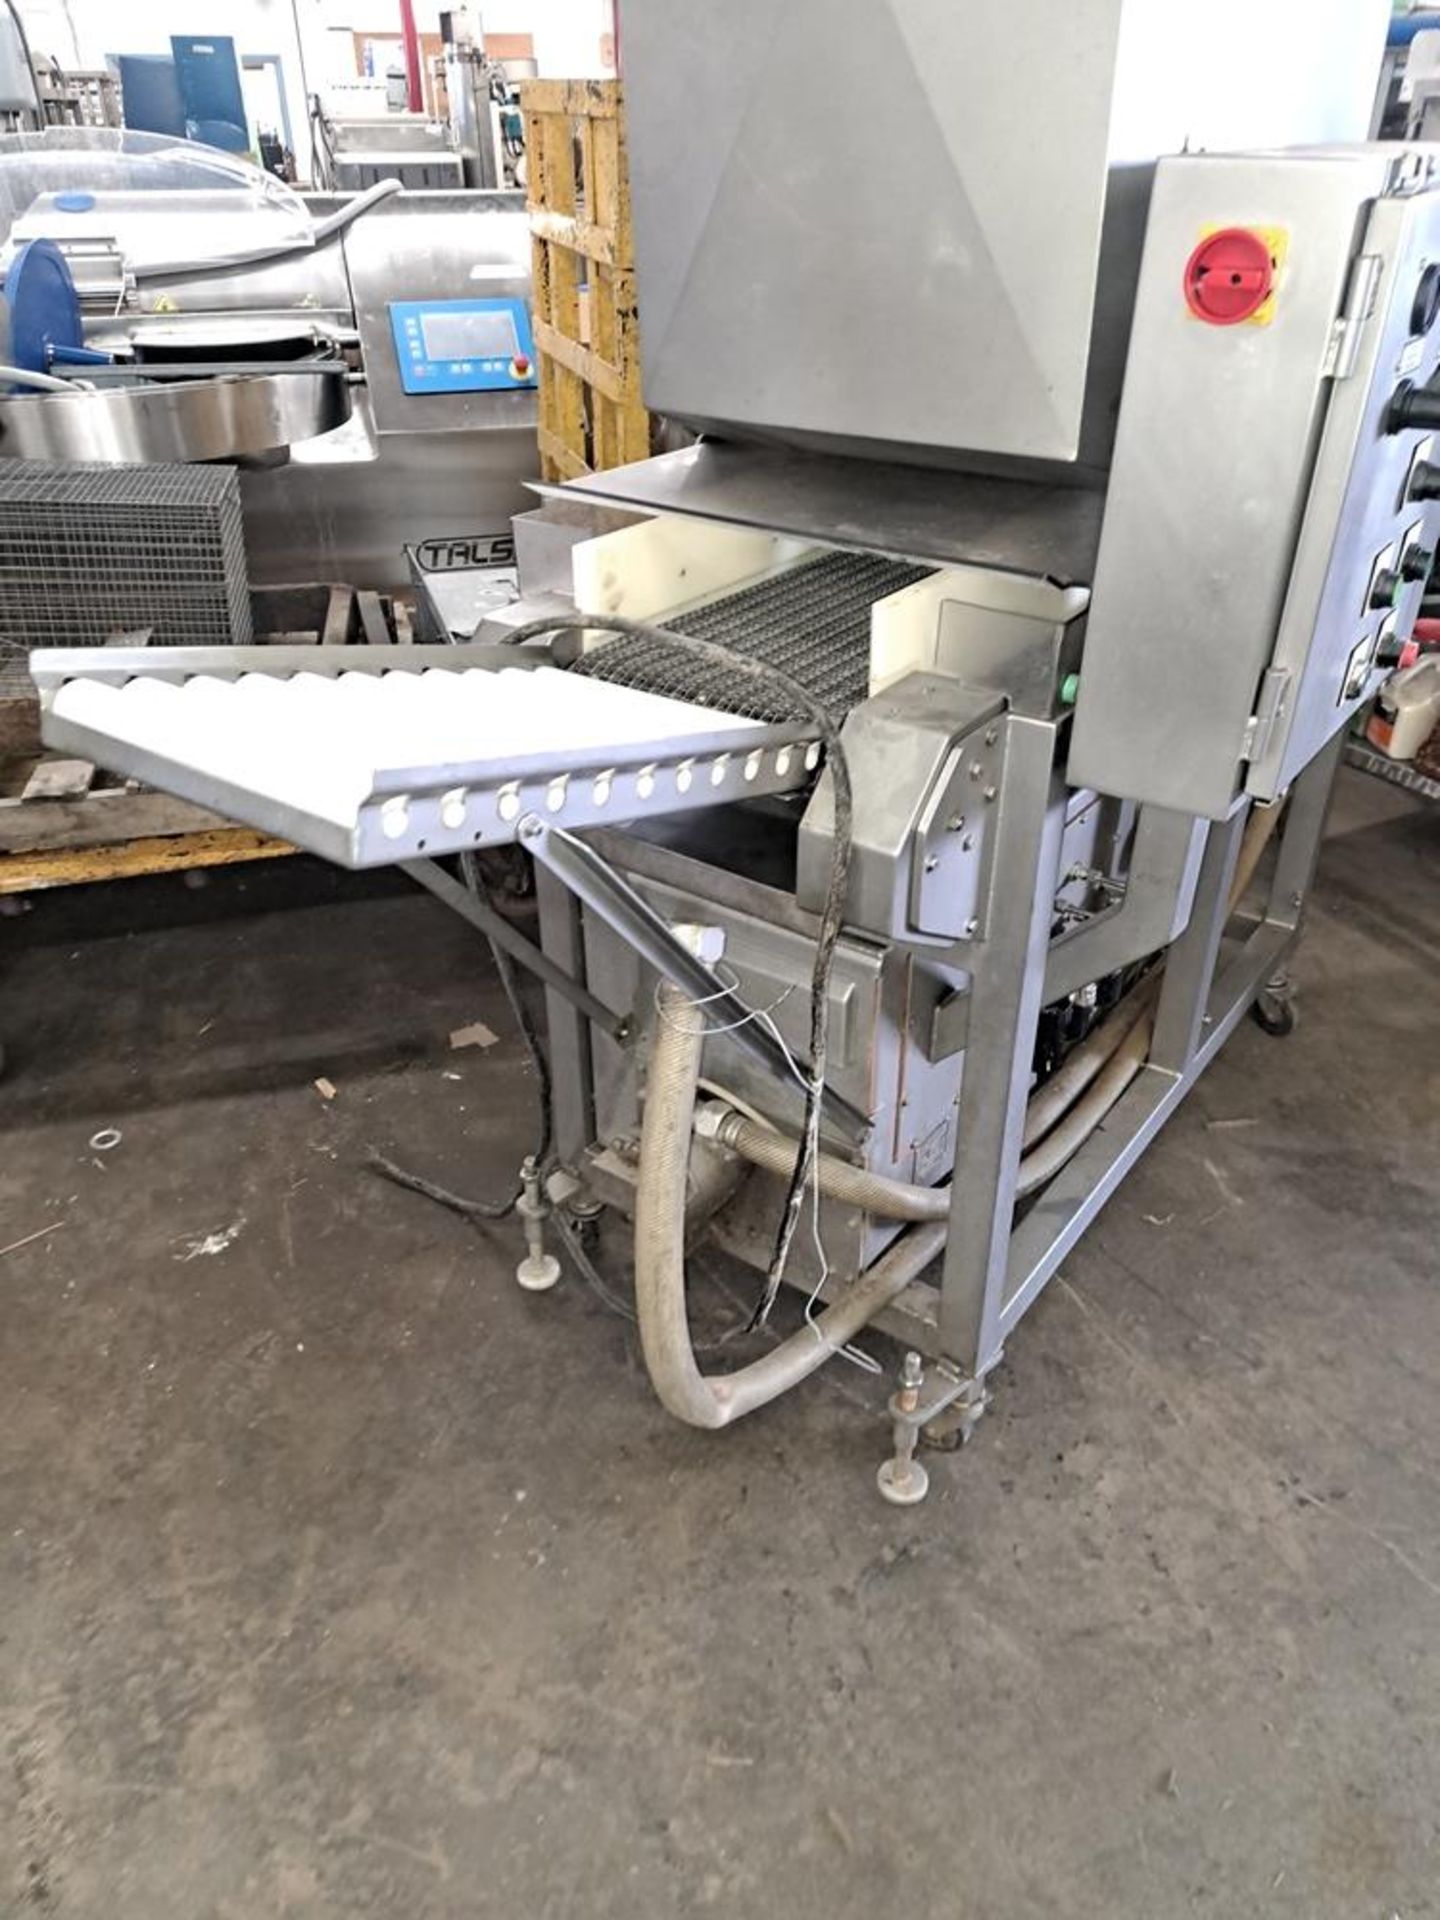 Townsend Mdl. 1450 Injector, Ser. #328, 13 1/2" wide X 6' long stainless steel conveyor, stainless - Image 3 of 11